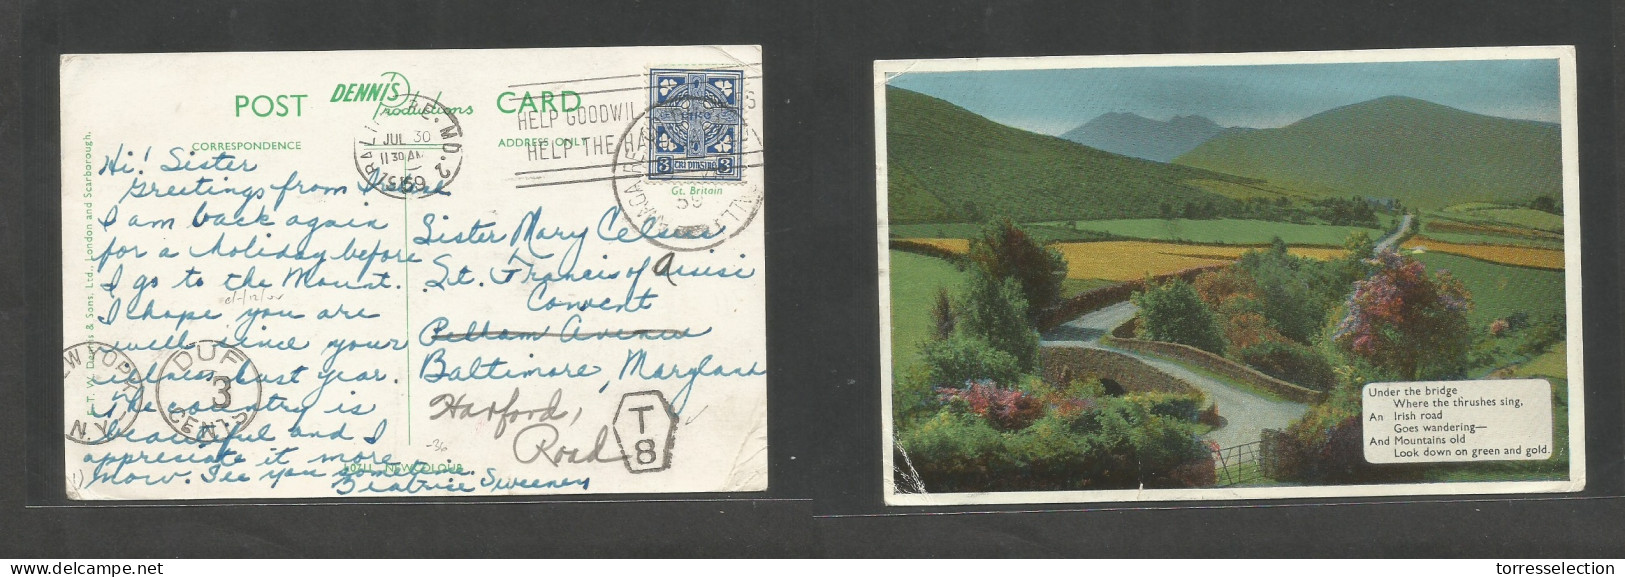 EIRE. 1959. Color Fkd Ppc. Amagare - USA, Baltimore (30 July) Via NYC, Taxed, Due Irish "T8" Scarce Cachet. Fine. - Used Stamps